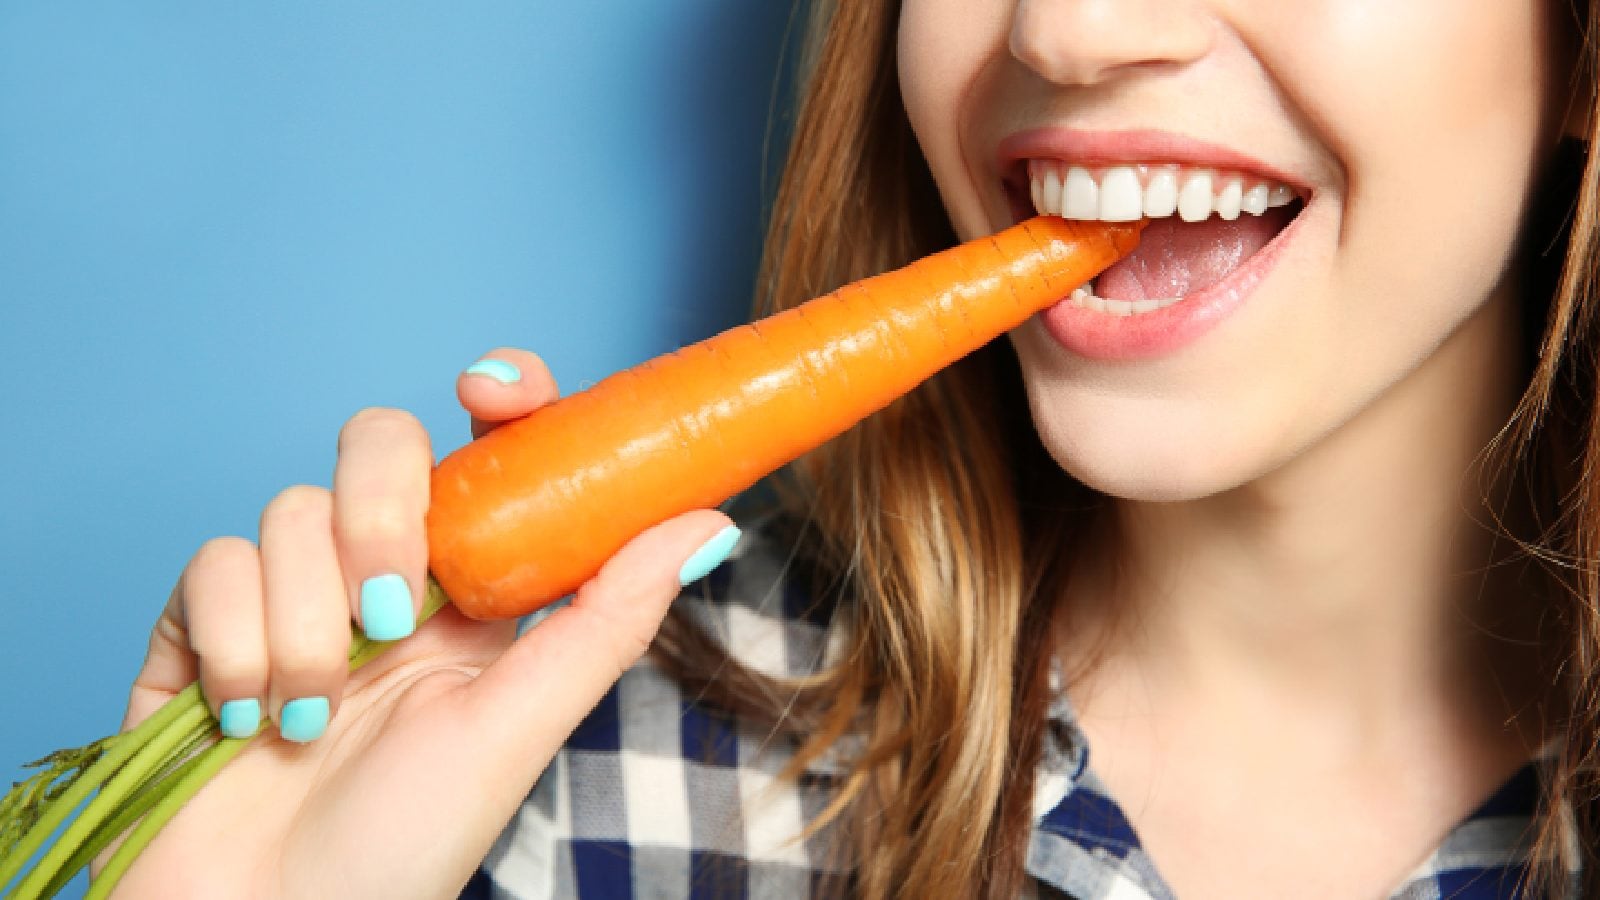 Carrot can prevent bad breath! Know its benefits for oral